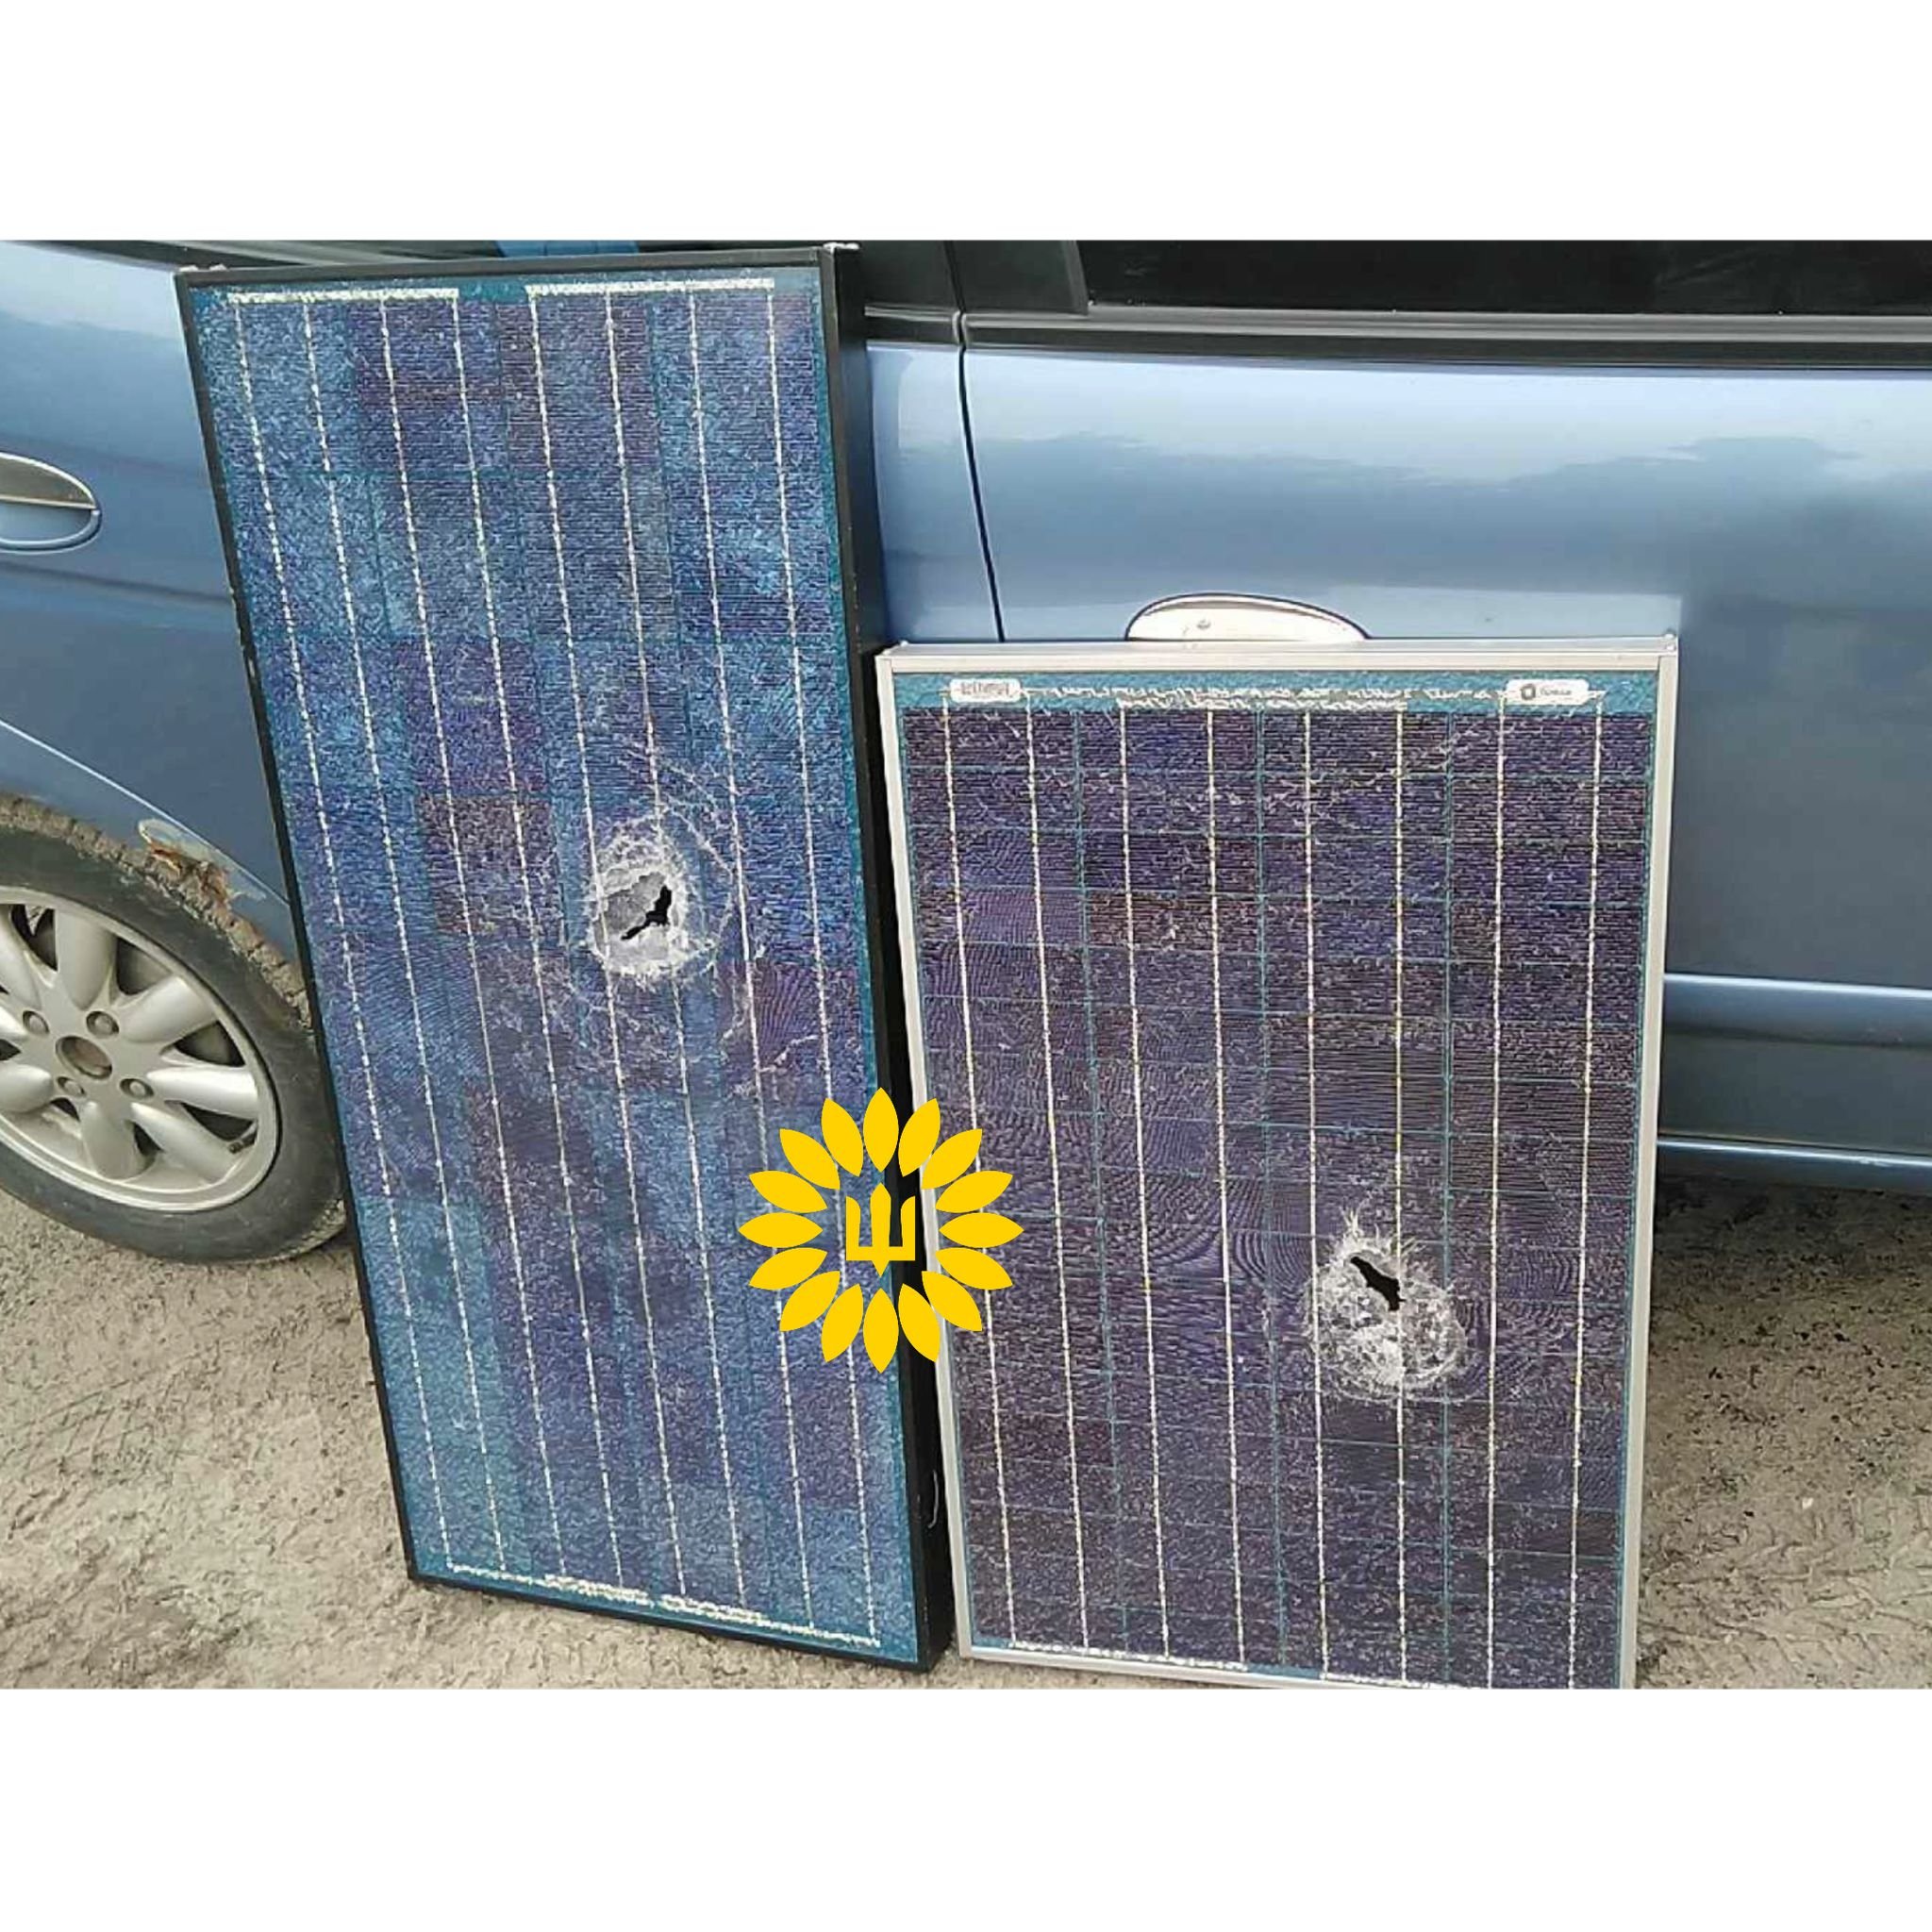 Even shot through, barely working, solar panels fulfilled their purpose.

Thank you 💪🇺🇸🌻🇺🇦✌️ connection between people is what makes us stronger.

 Join Sunflower Seeds Ukraine, there are various peaceful ways to help Ukrainians withstand and d